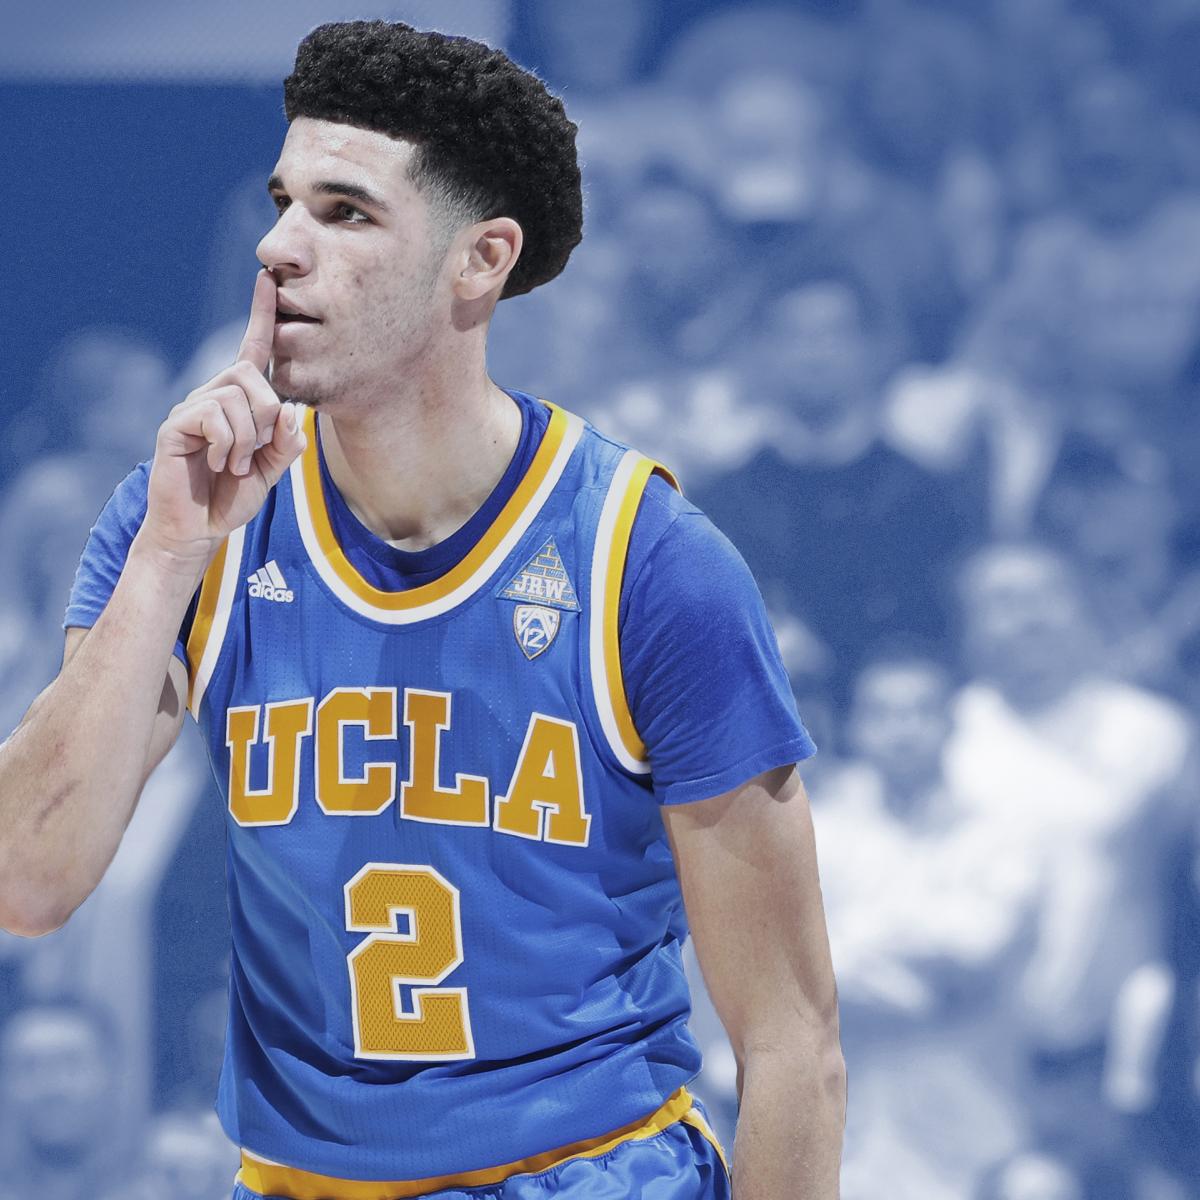 Watch: UCLA star Lonzo Ball goes down hard in NCAA tournament first round  game